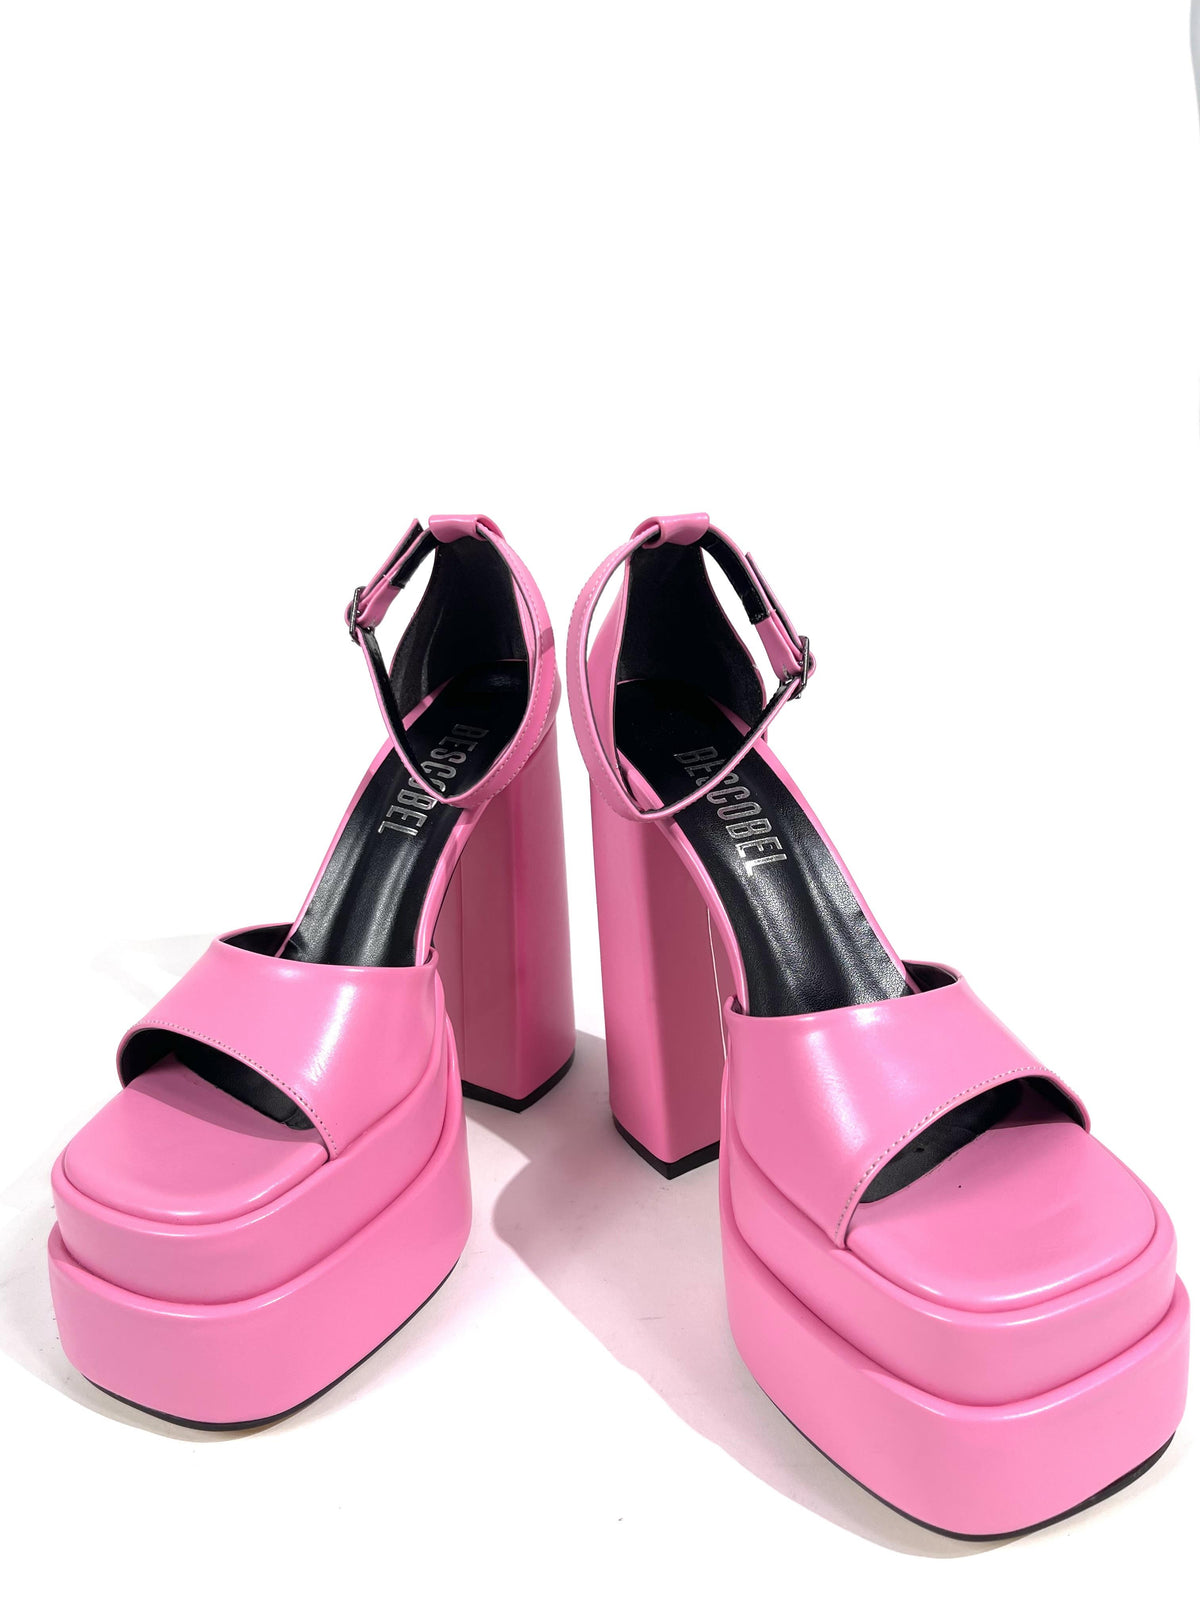 Women's Zoony Pink Skin High Double Platform Open-Front Sandals Shoes - STREETMODE ™